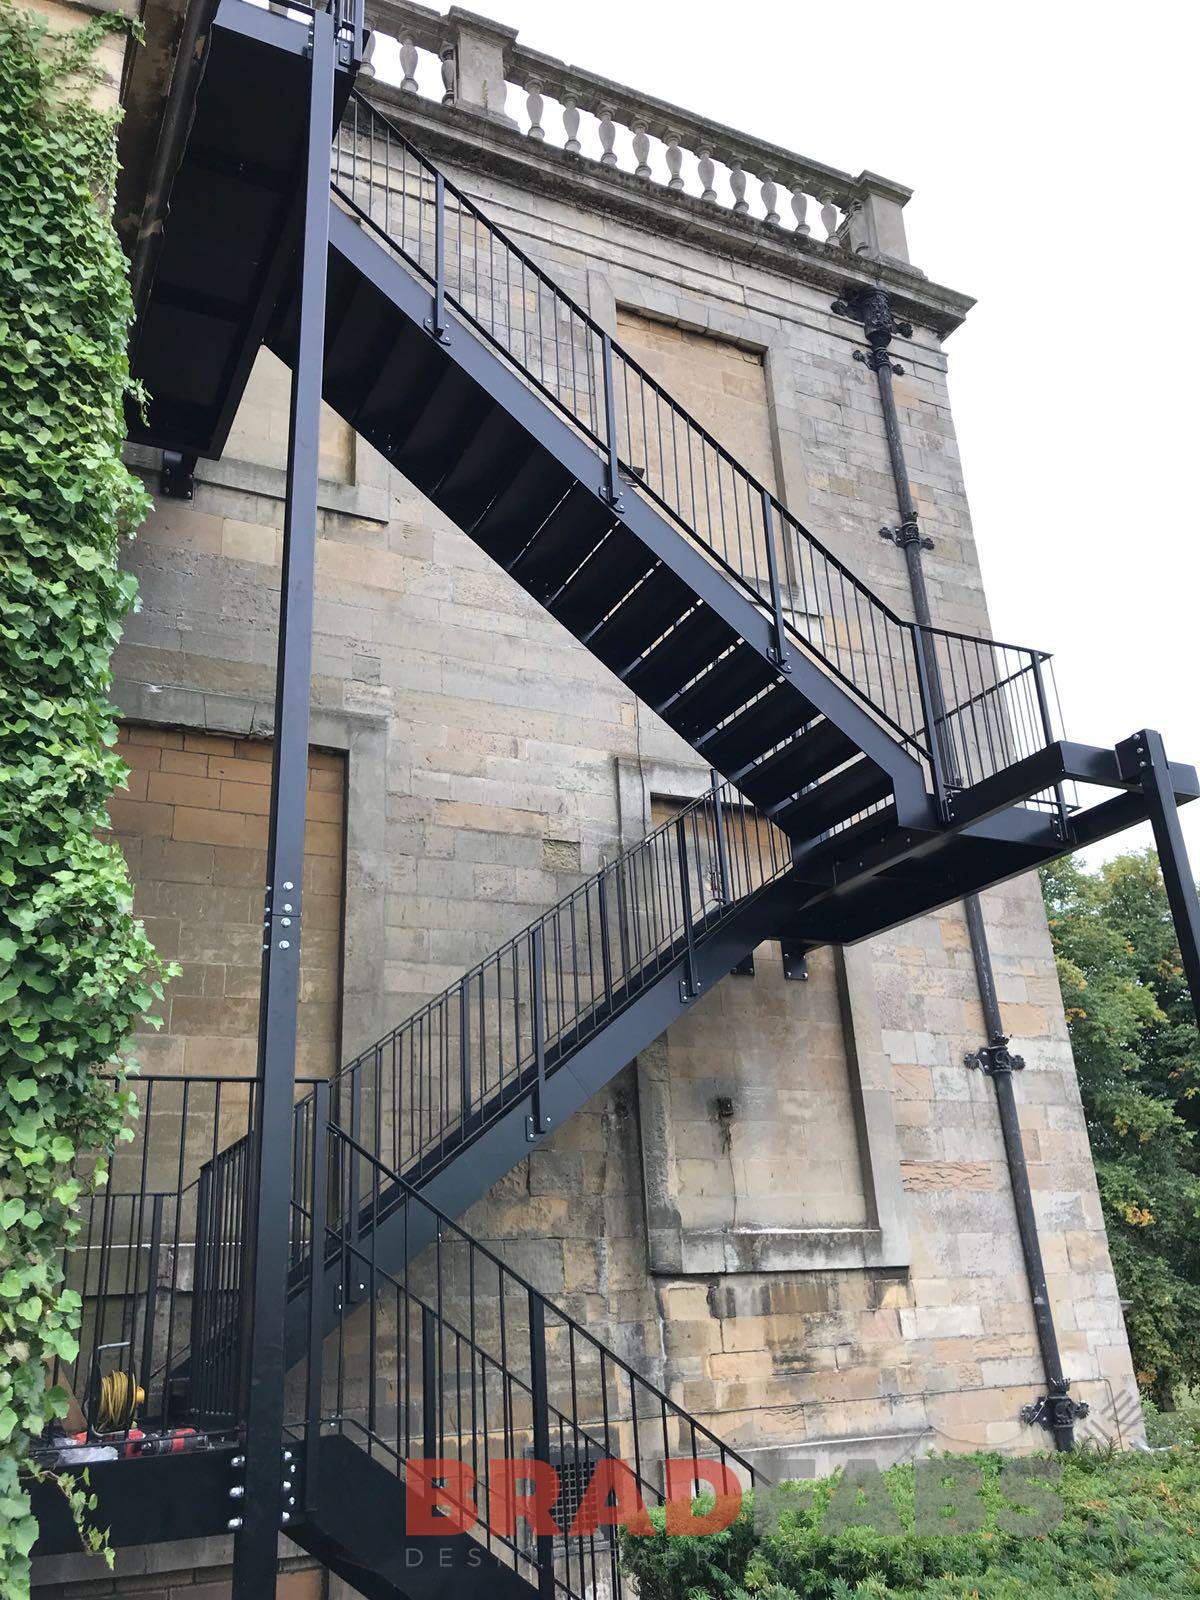 Straight fire escape mild steel powder coated black and galvanised with vertical bar balustrde and durbar treads